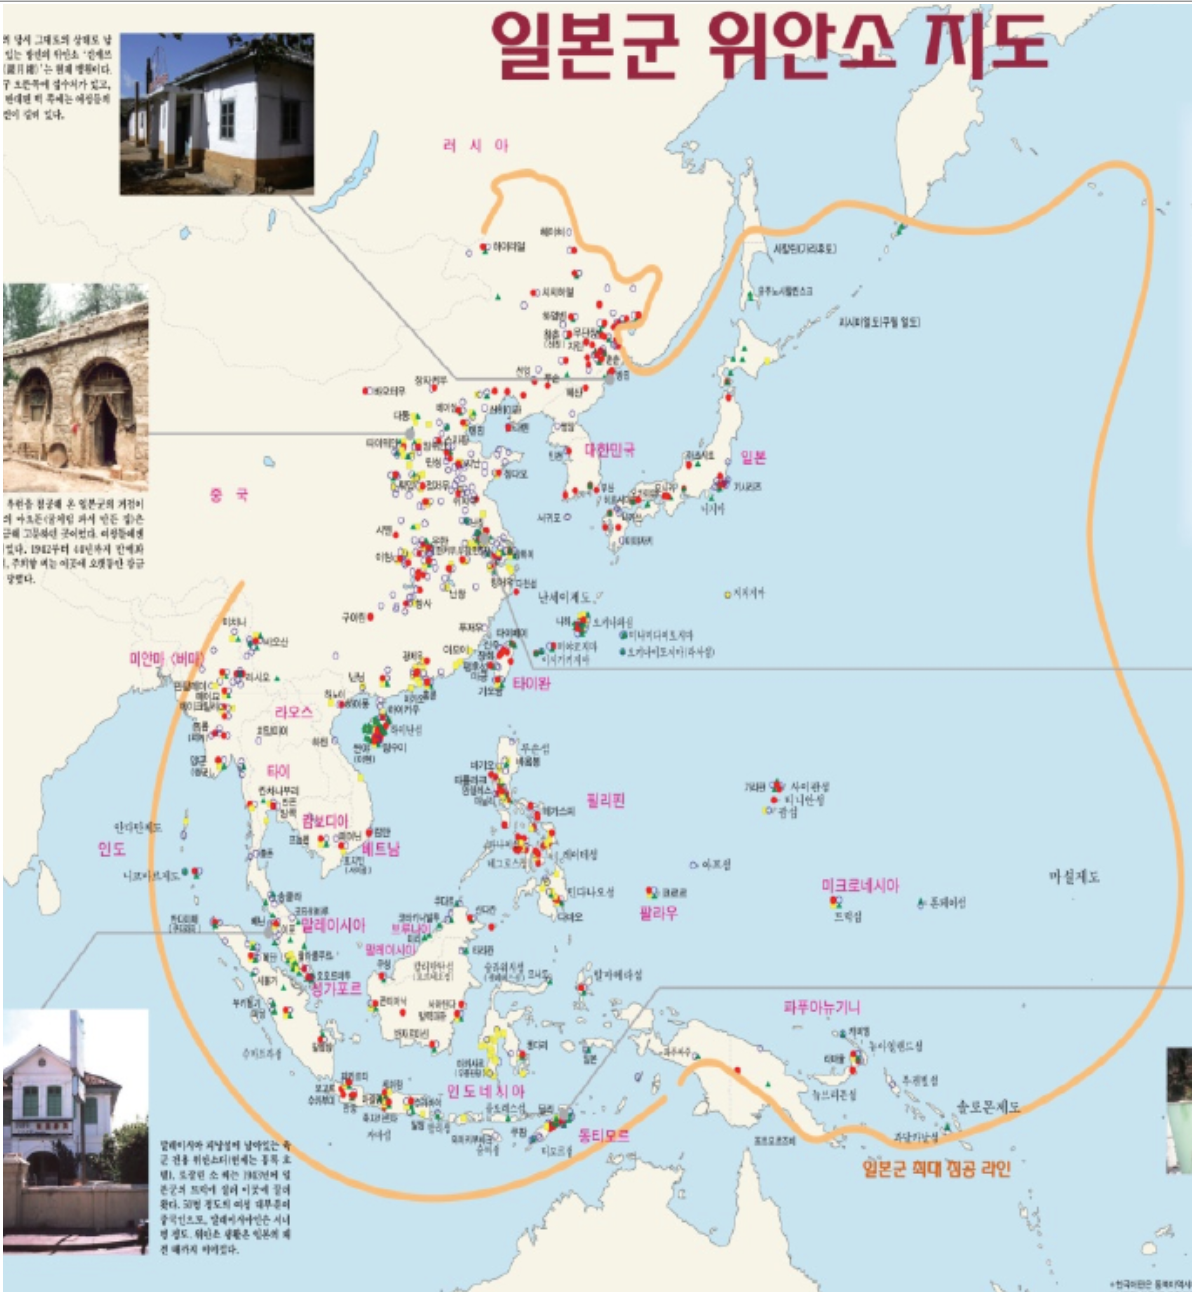 A map showing the locations of Japanese Army’s comfort stations revealed so far dispersed across the Asia-Pacific region (Source : http://womenandwar.net/kr/what-is/) A map showing the locations of Japanese Army’s comfort stations revealed so far dispersed across the Asia-Pacific region (Source : http://womenandwar.net/kr/what-is/) 